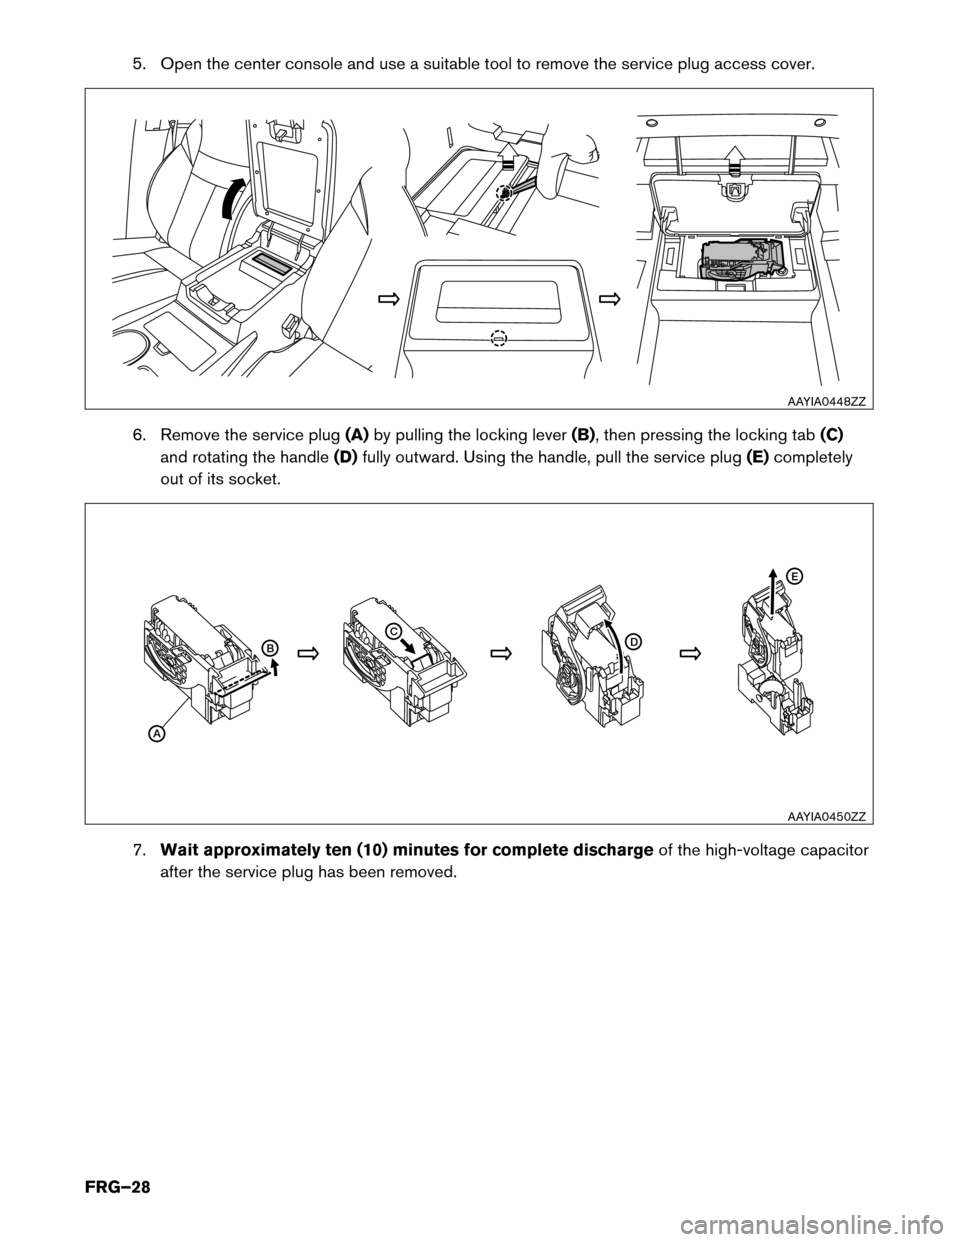 NISSAN MURANO HYBRID 2016 3.G First Responders Guide 5. Open the center console and use a suitable tool to remove the service plug access cover.
6.
Remove the service plug (A)by pulling the locking lever (B), then pressing the locking tab (C)
and rotati